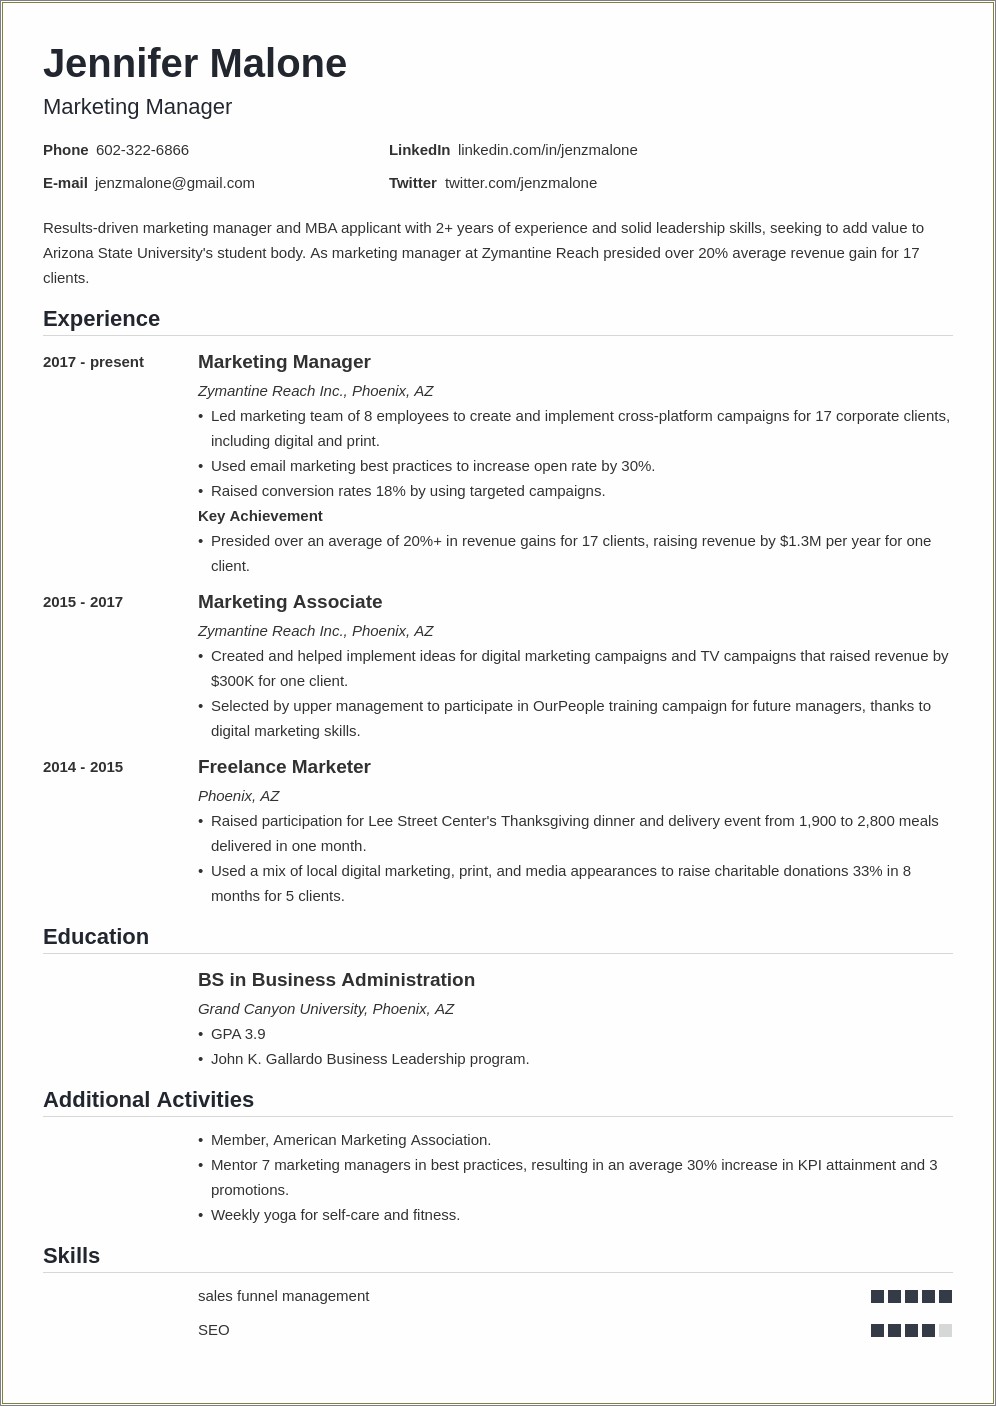 Resume Samples For Admission To Graduate School